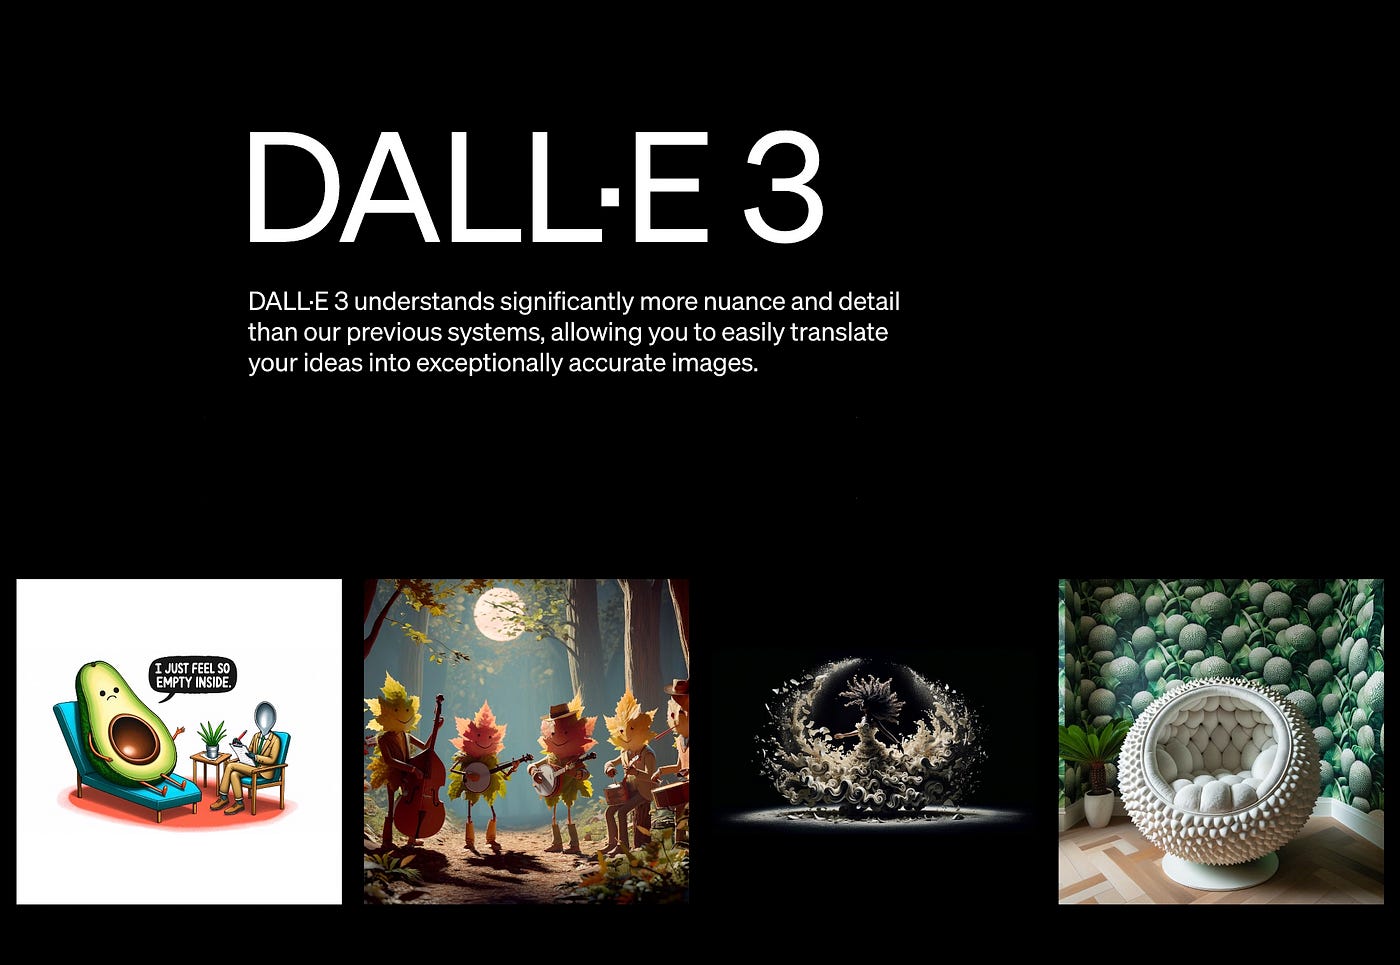 DALL-E 2 AI image generation now available for Microsoft Bing in some  regions (Updated)